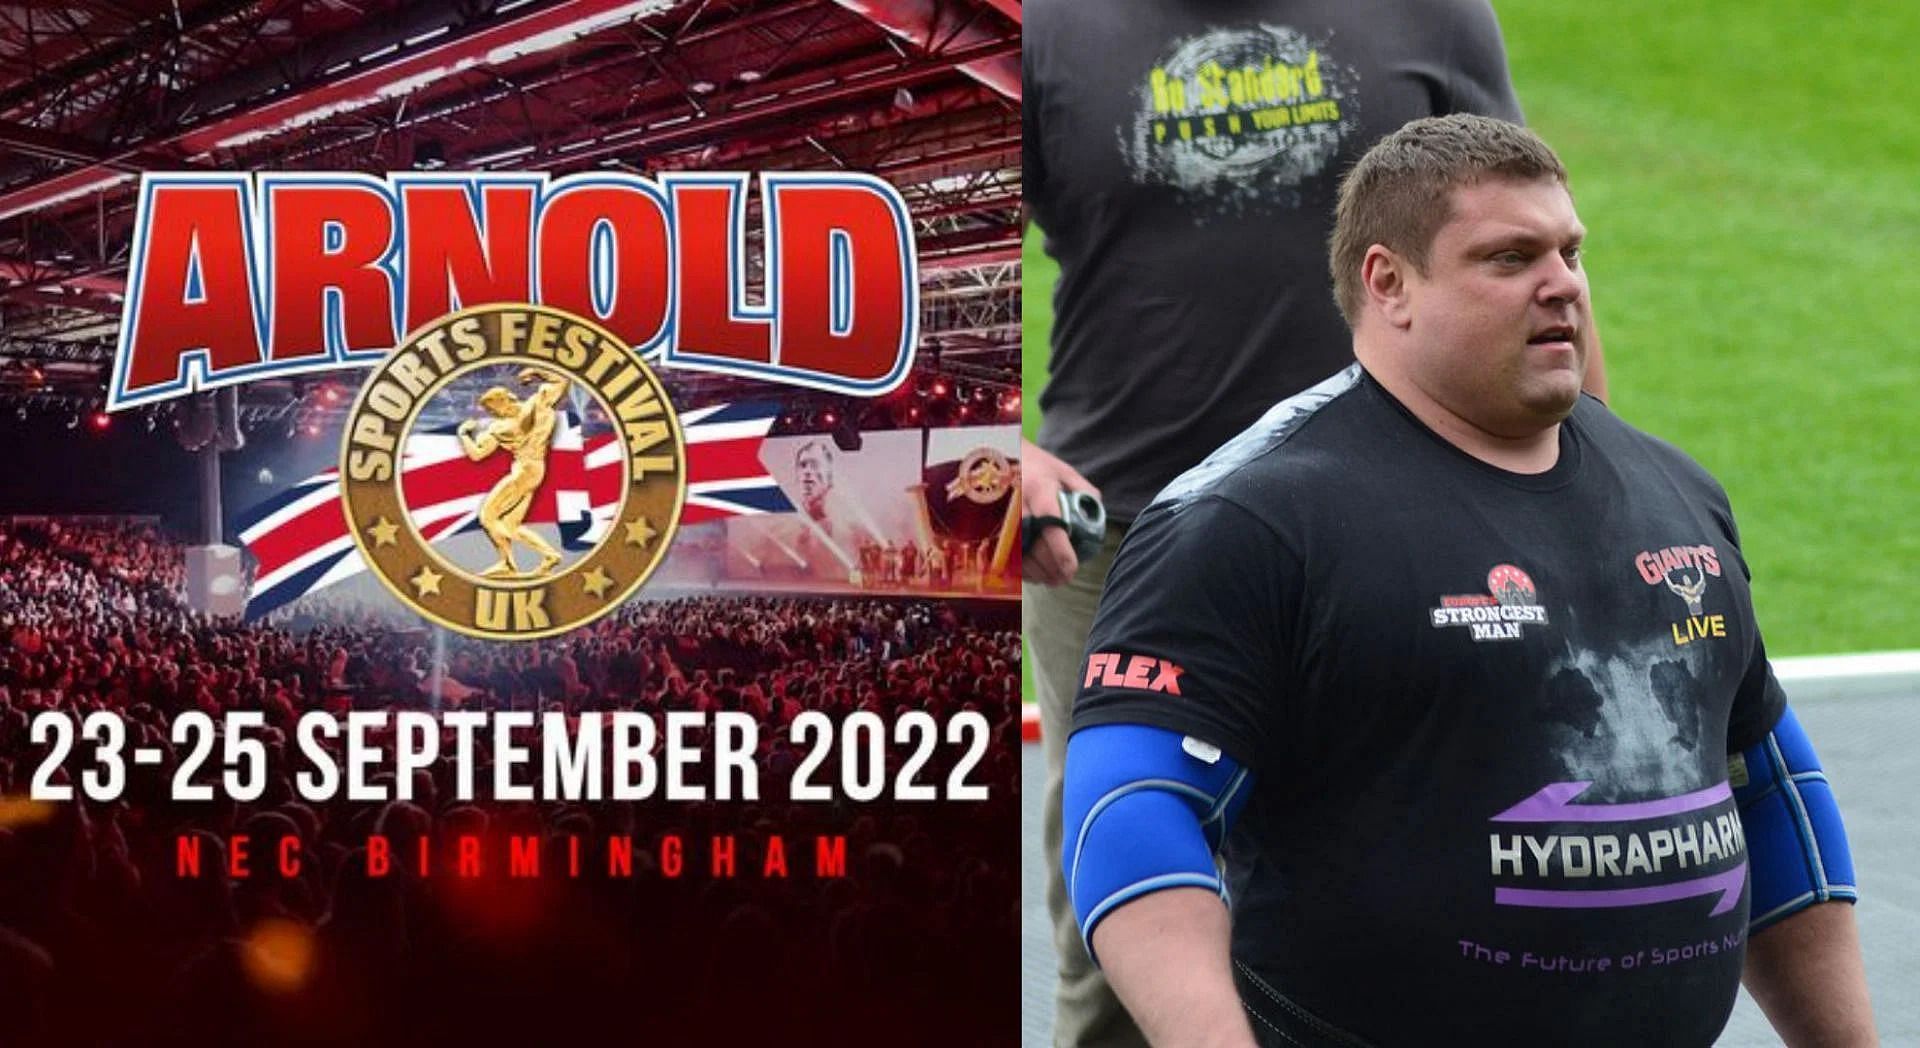 The 2022 Arnold Classic Strongman (Image Via Facebook and Flickr)